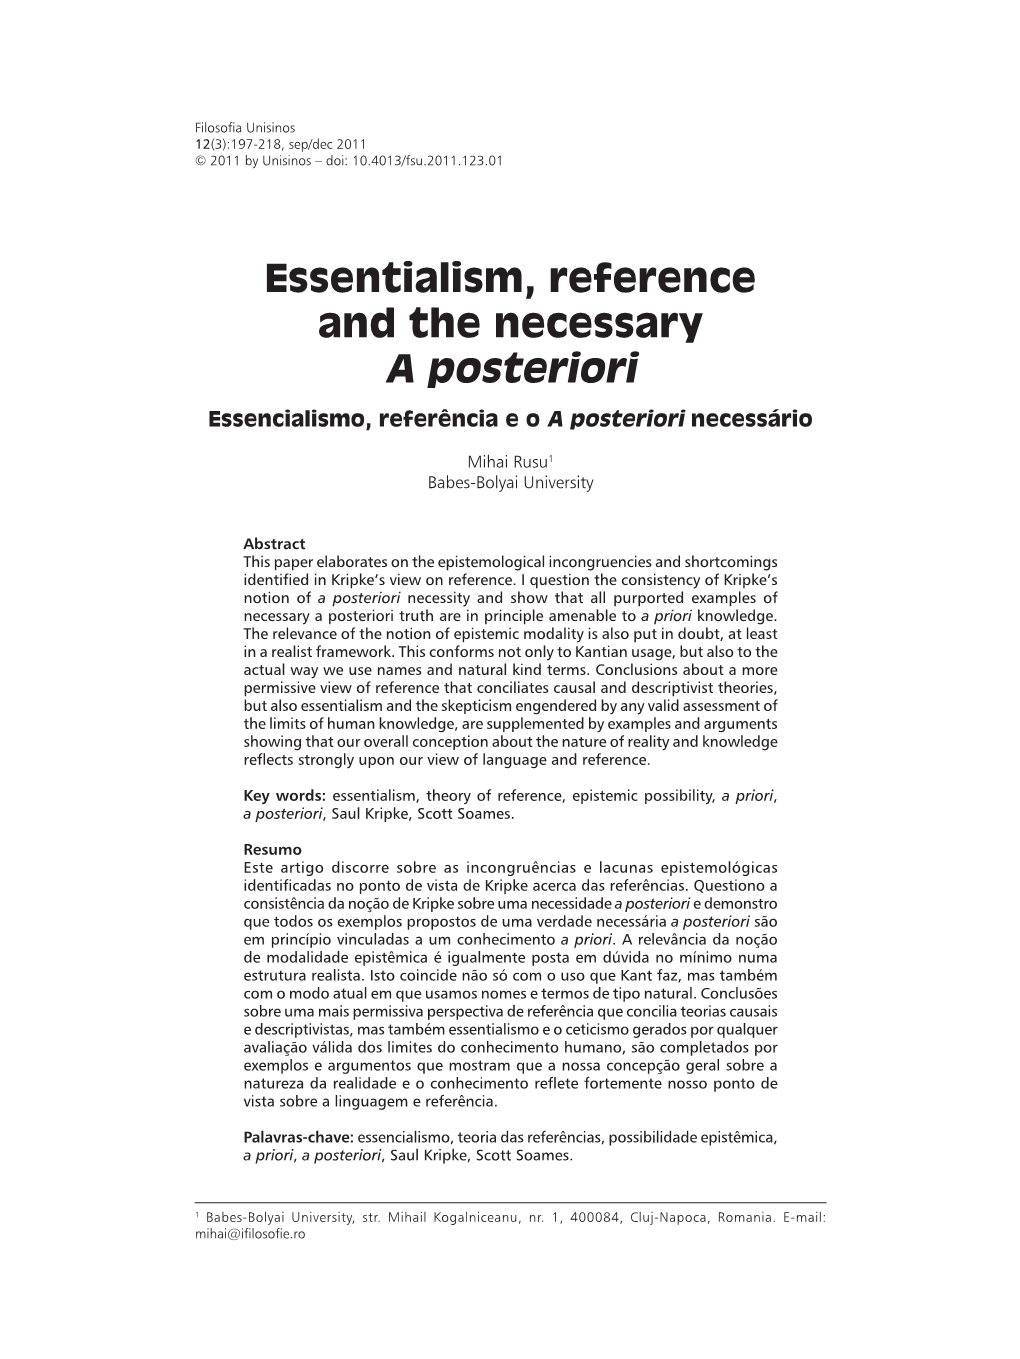 Essentialism, Reference and the Necessary a Posteriori